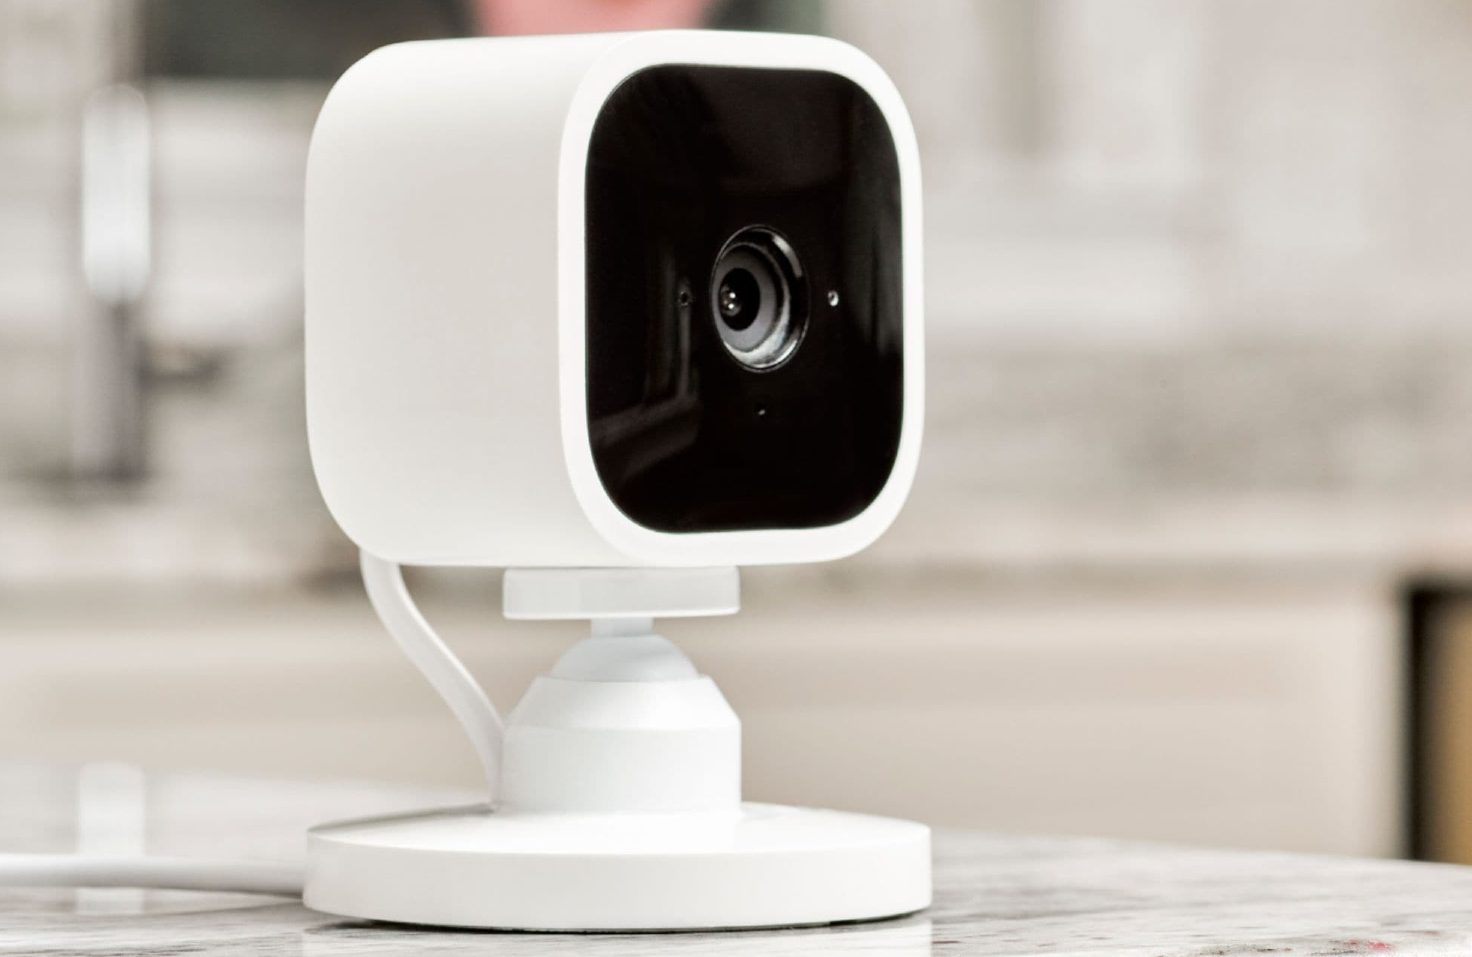 This affordable Blink home security camera is now even cheaper